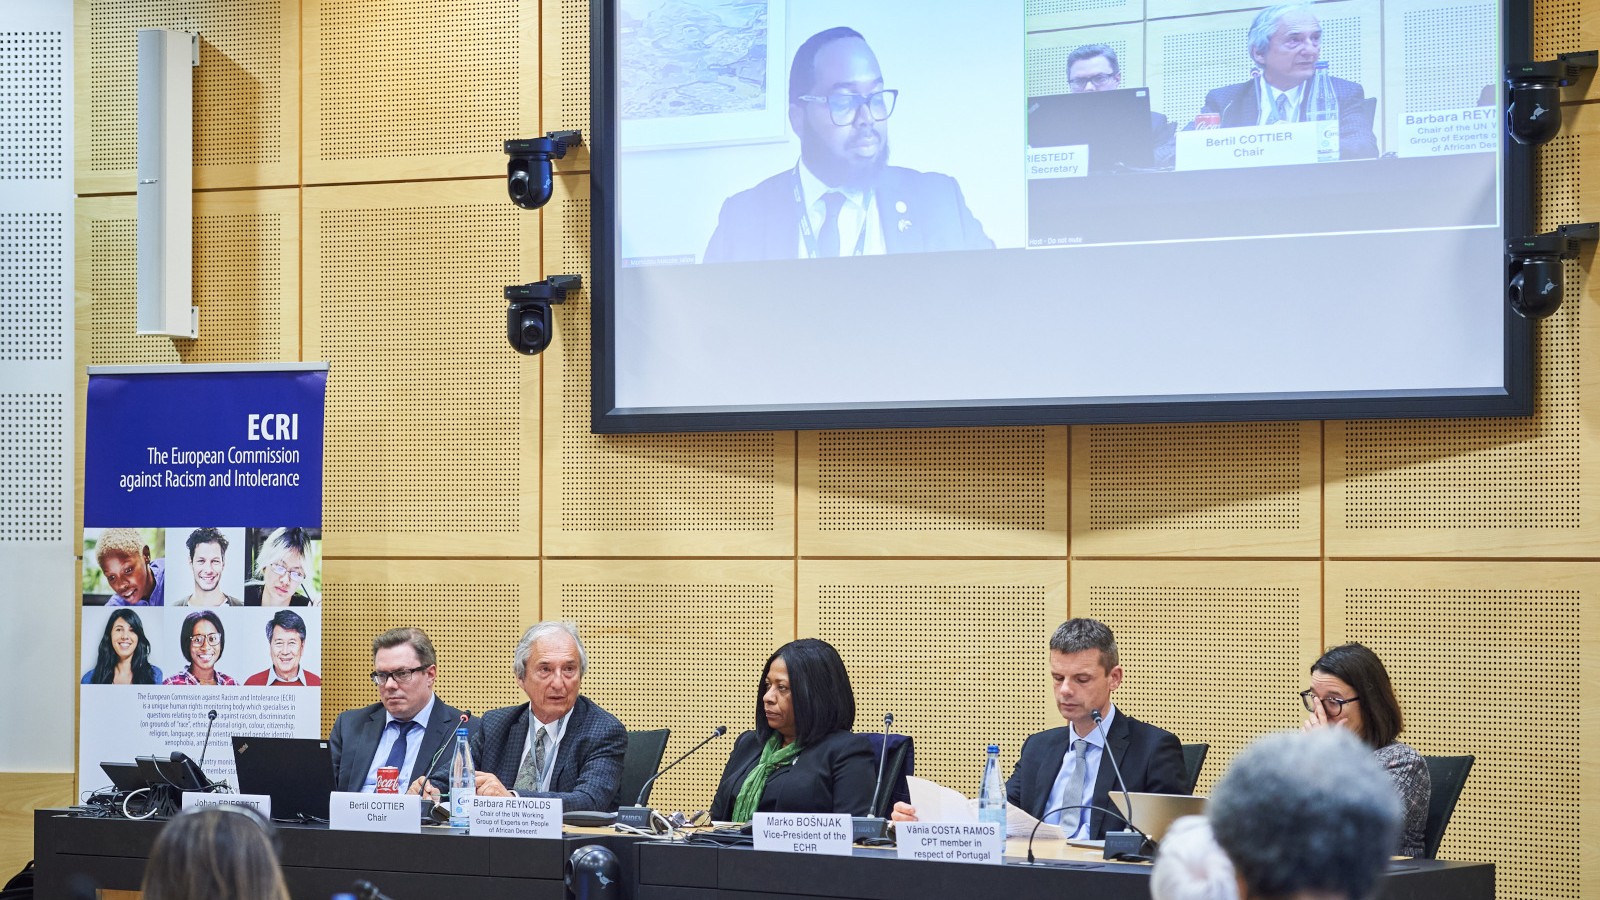 ECRI holds its 94th plenary meeting and exchanges views with the Chairs of the Council of Europe’s Expert Committee on Roma and Traveller Issues and of the United Nations Working Group of Experts on People of African Descent